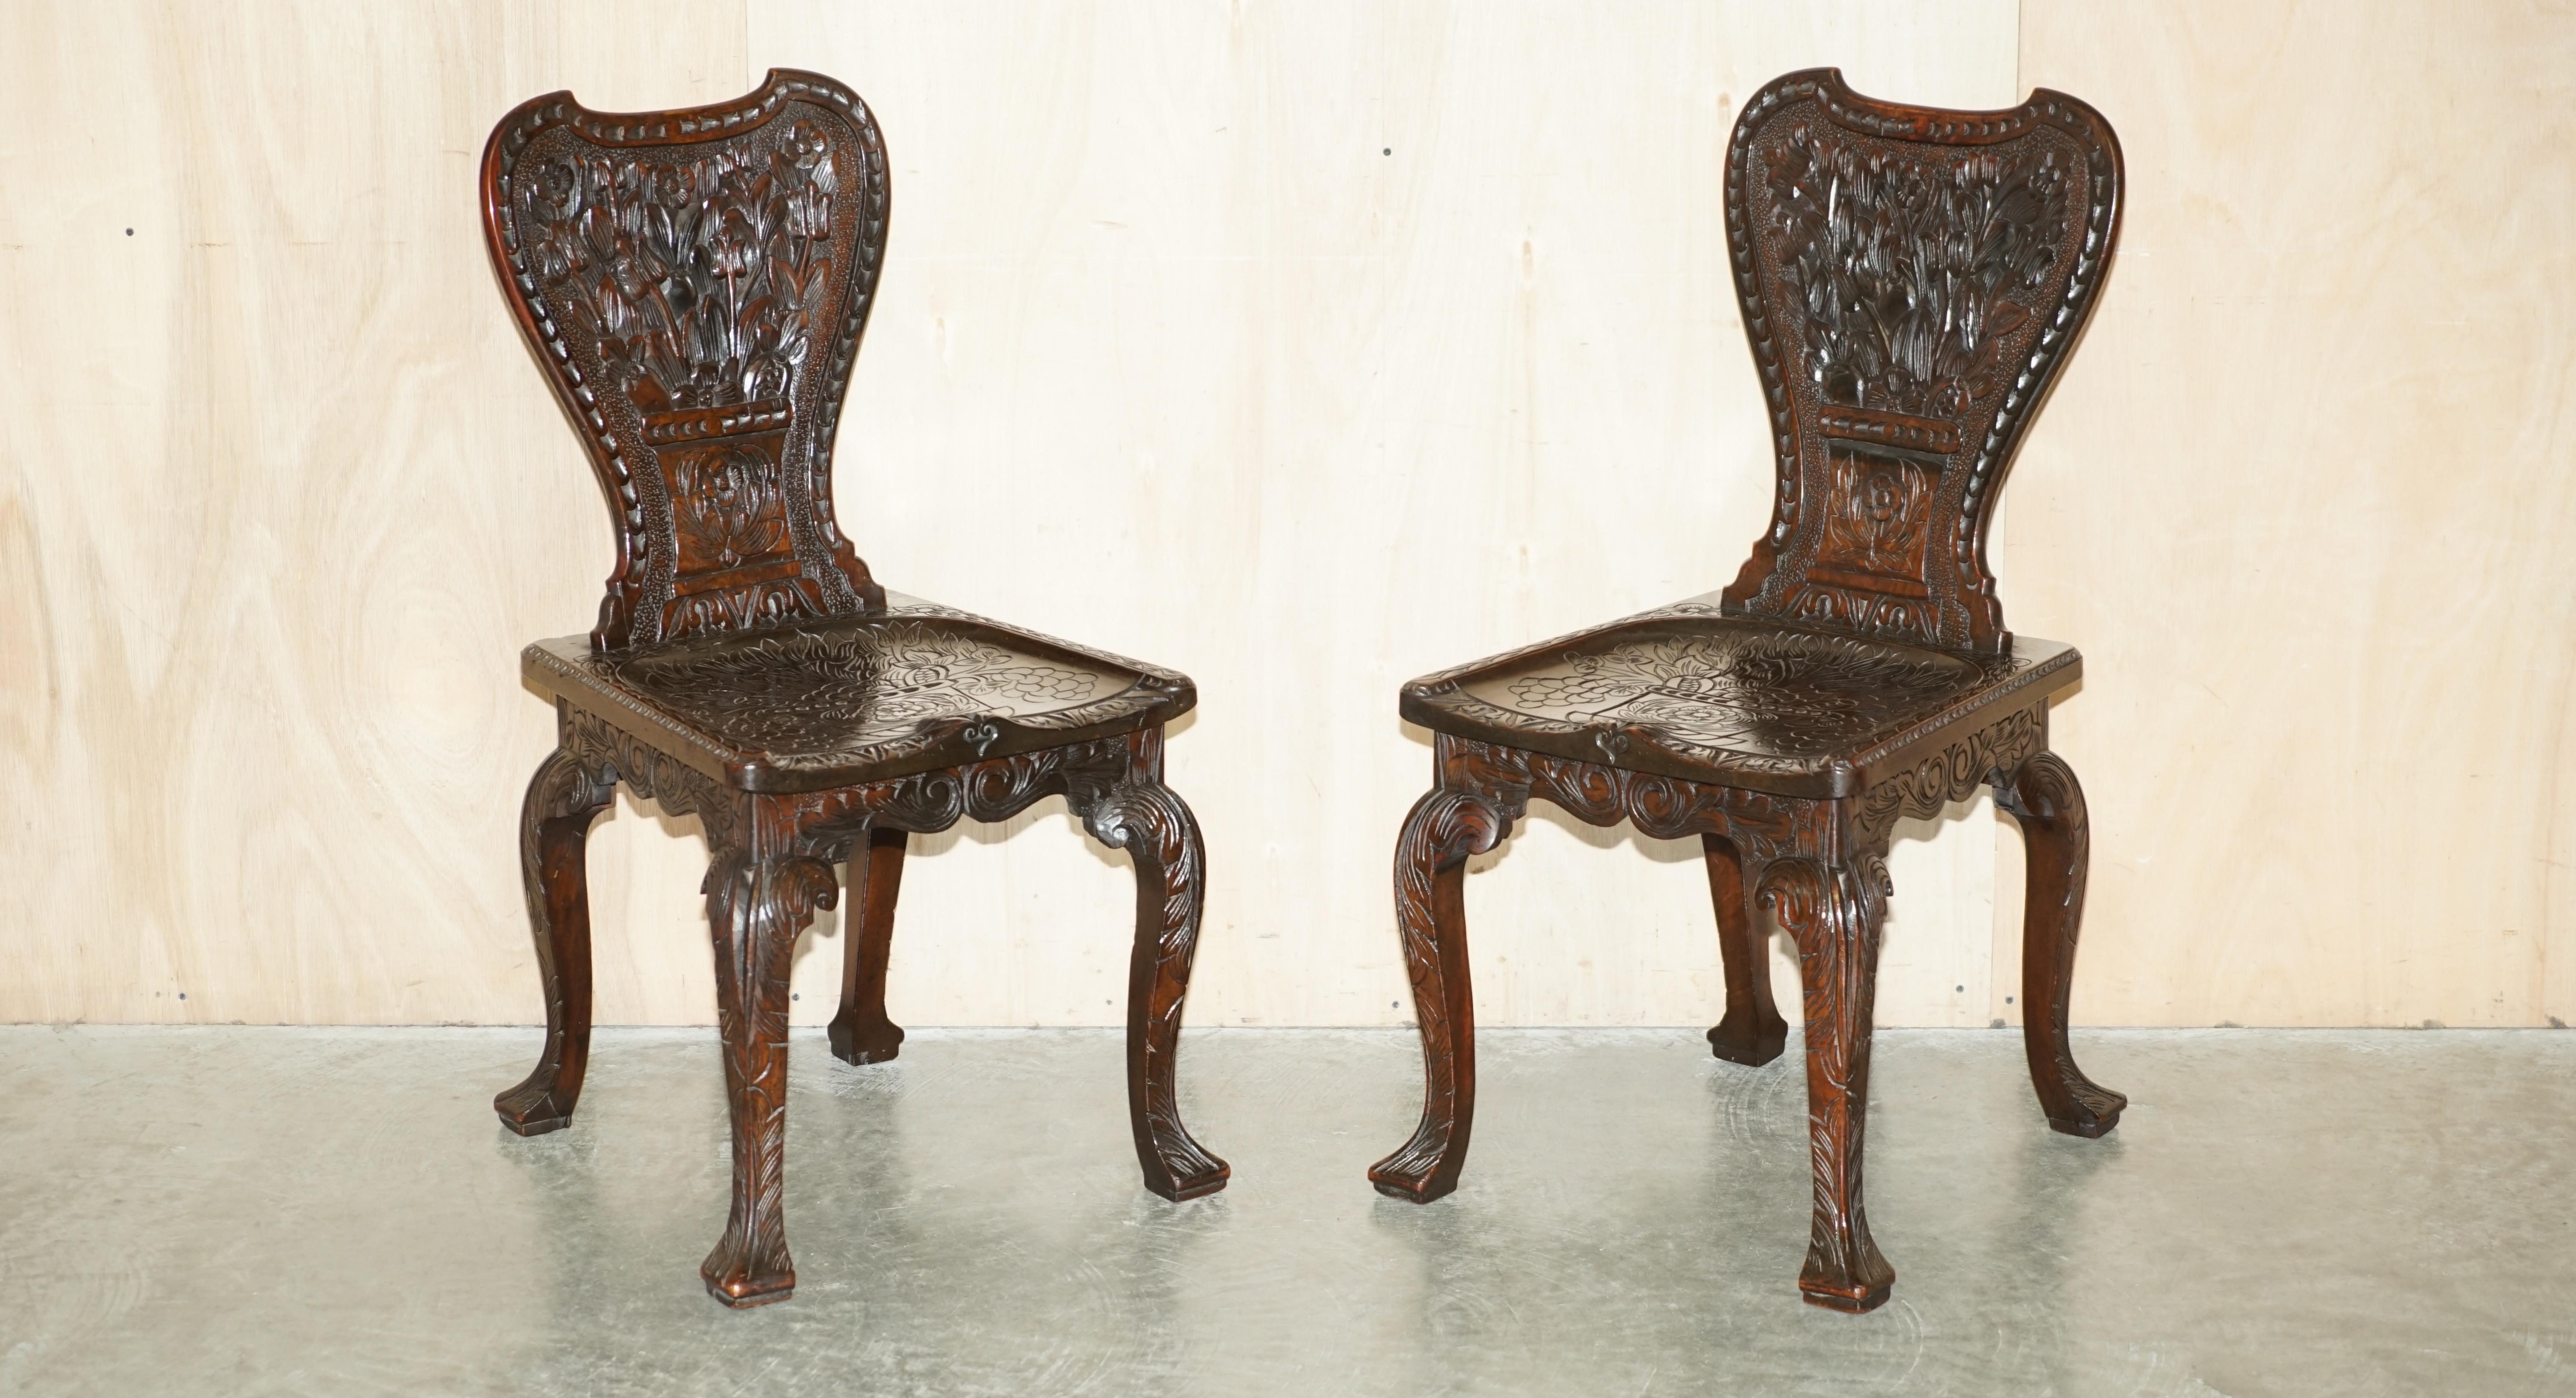 Royal House Antiques

Royal House Antiques is delighted to offer for sale this stunning pair of original Victorian circa 1860-1880, ornately hand carved Colonial Hall chairs which are super decorative 

Please note the delivery fee listed is just a